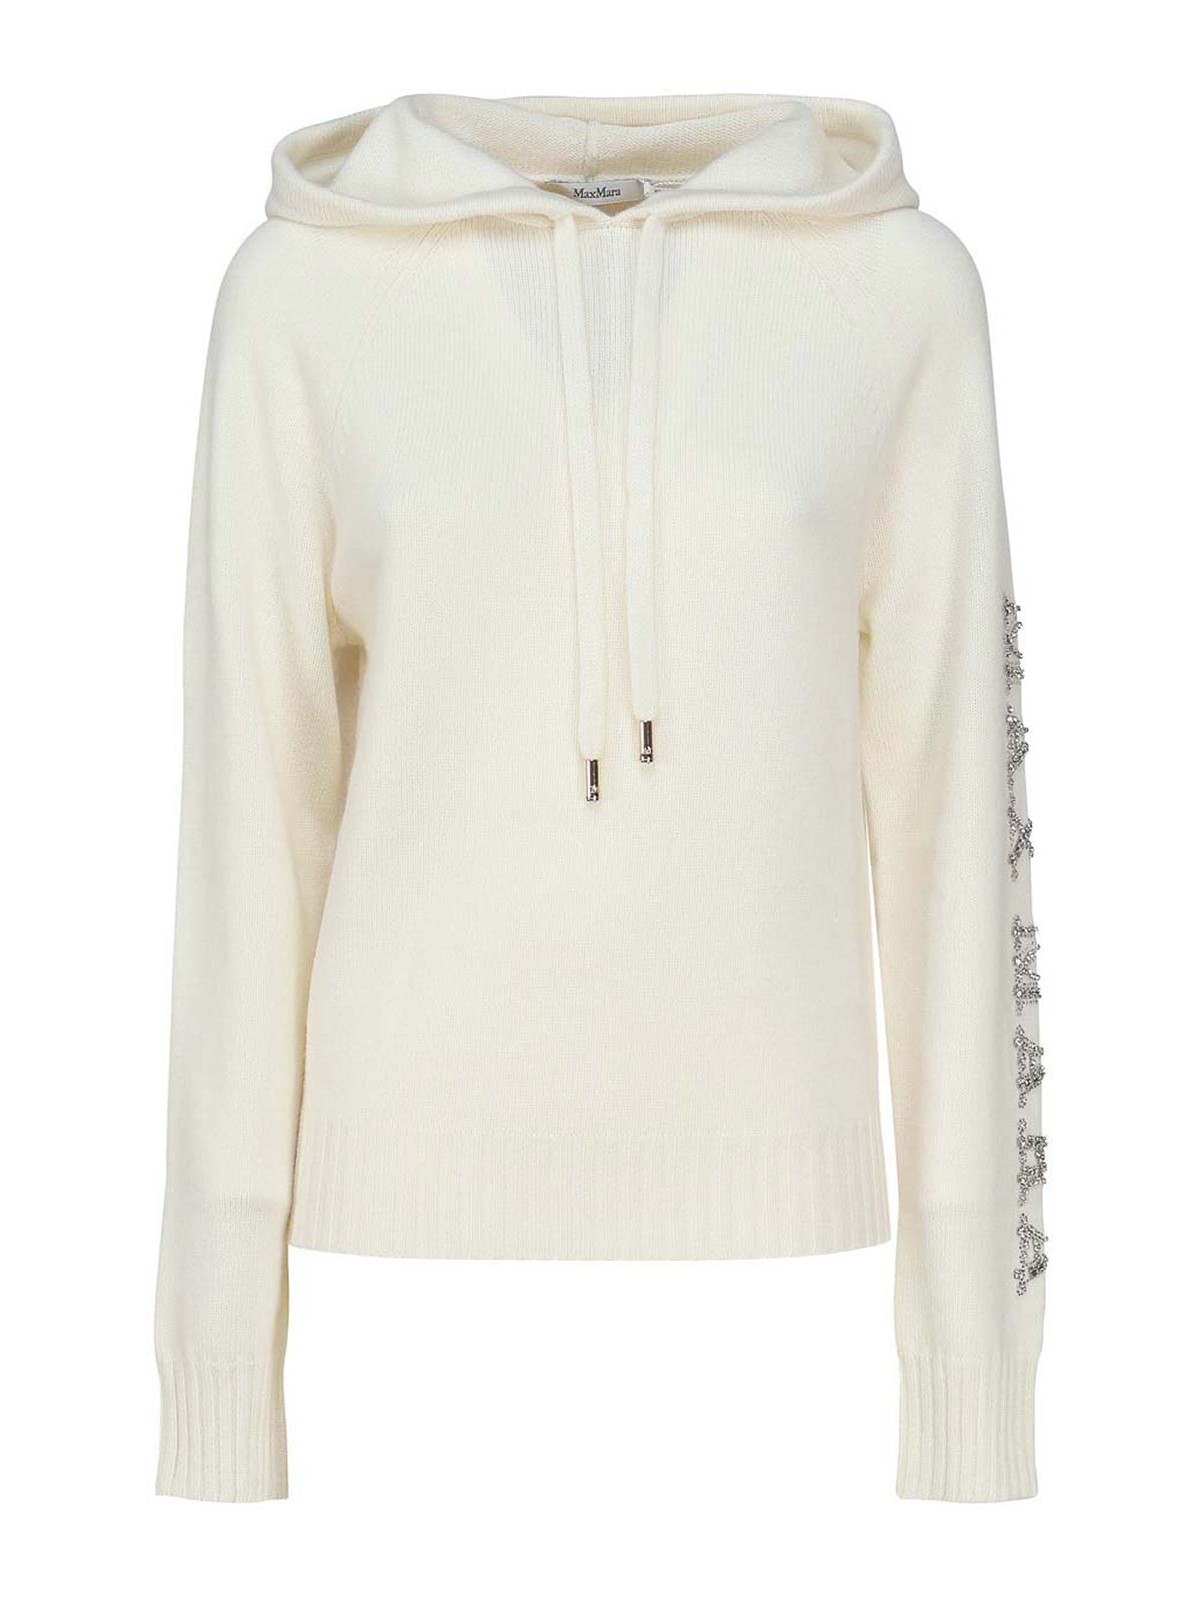 Max Mara Pineapple Sweater In Wool And Cashmere In White